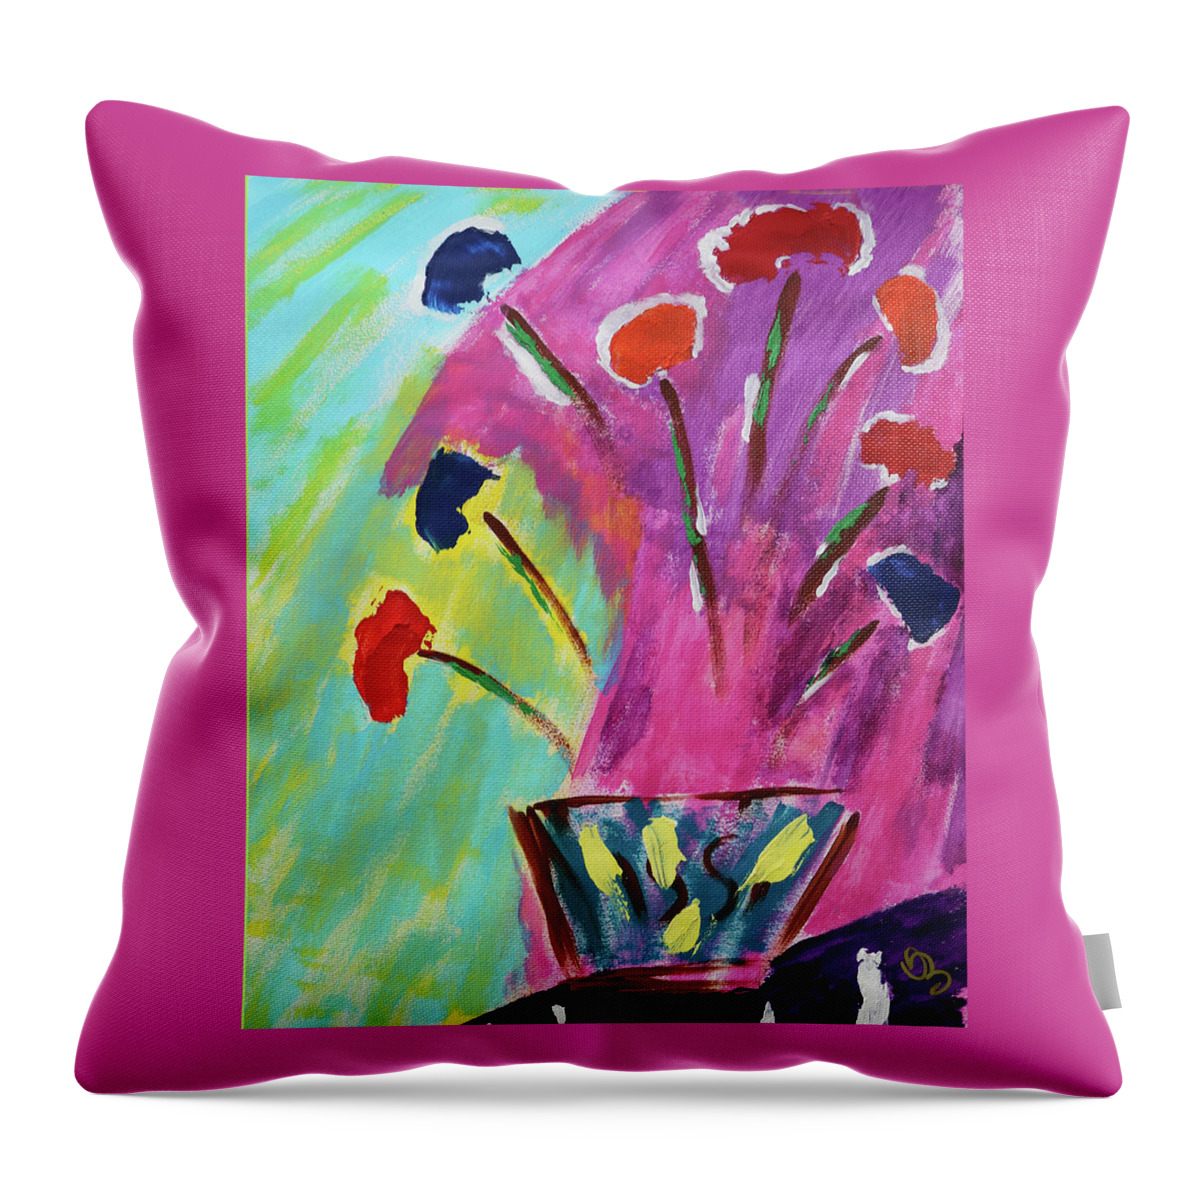 Flowers Throw Pillow featuring the painting Flowers Gone Wild by Deborah Boyd